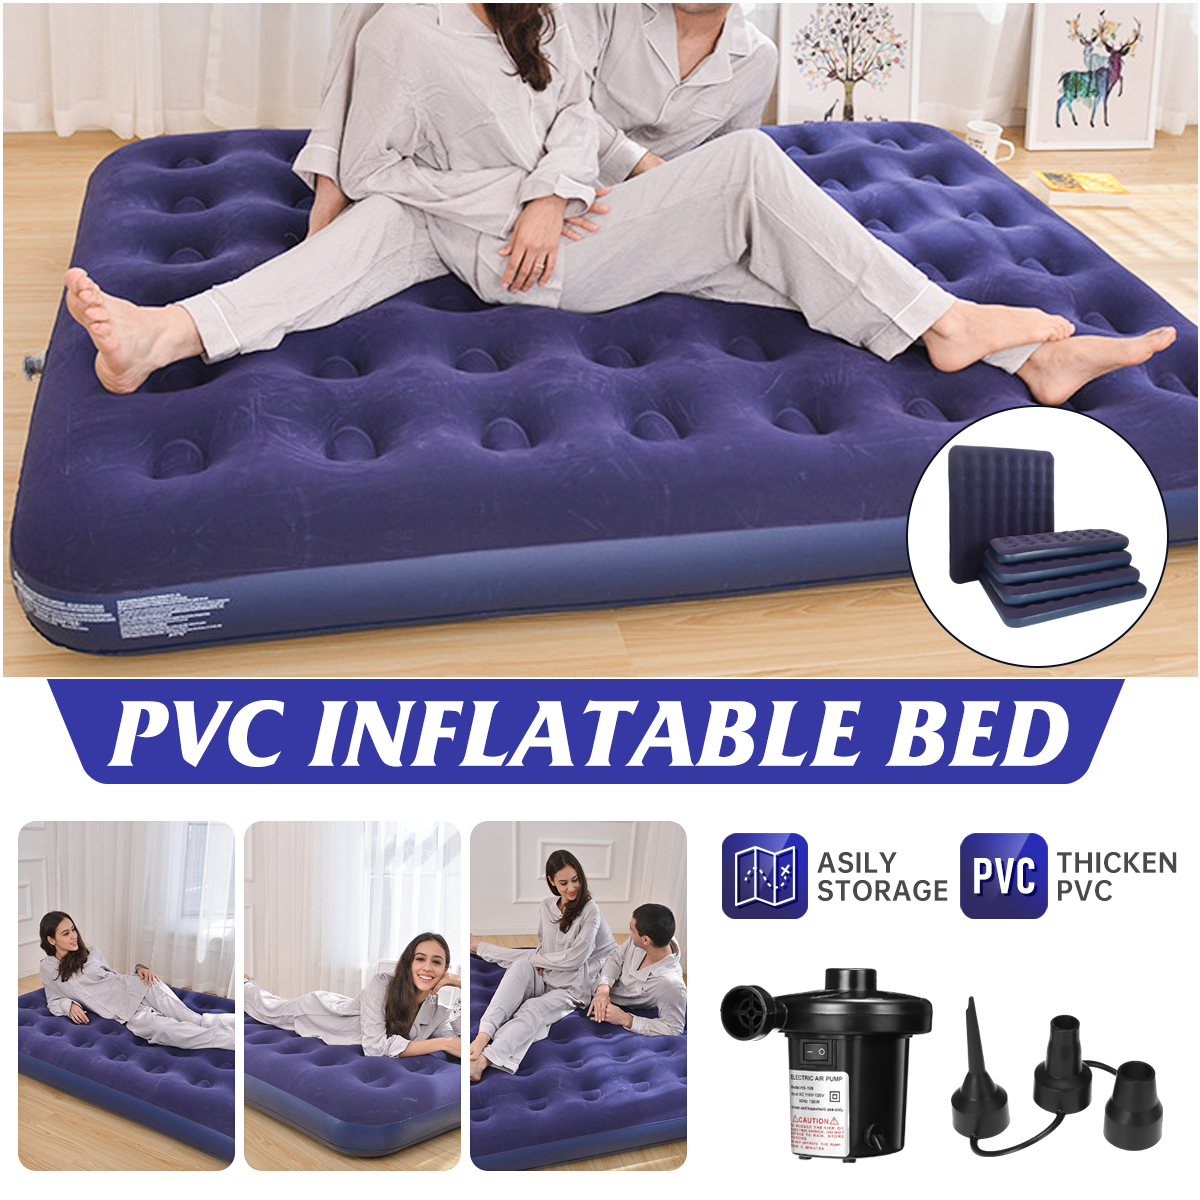 PVC-Inflatable-Bed-Inflatable-Mattress-Air-Mattress-Bed-Single-Double-Wide-Soft-Mattress-Comfortable-1842780-1